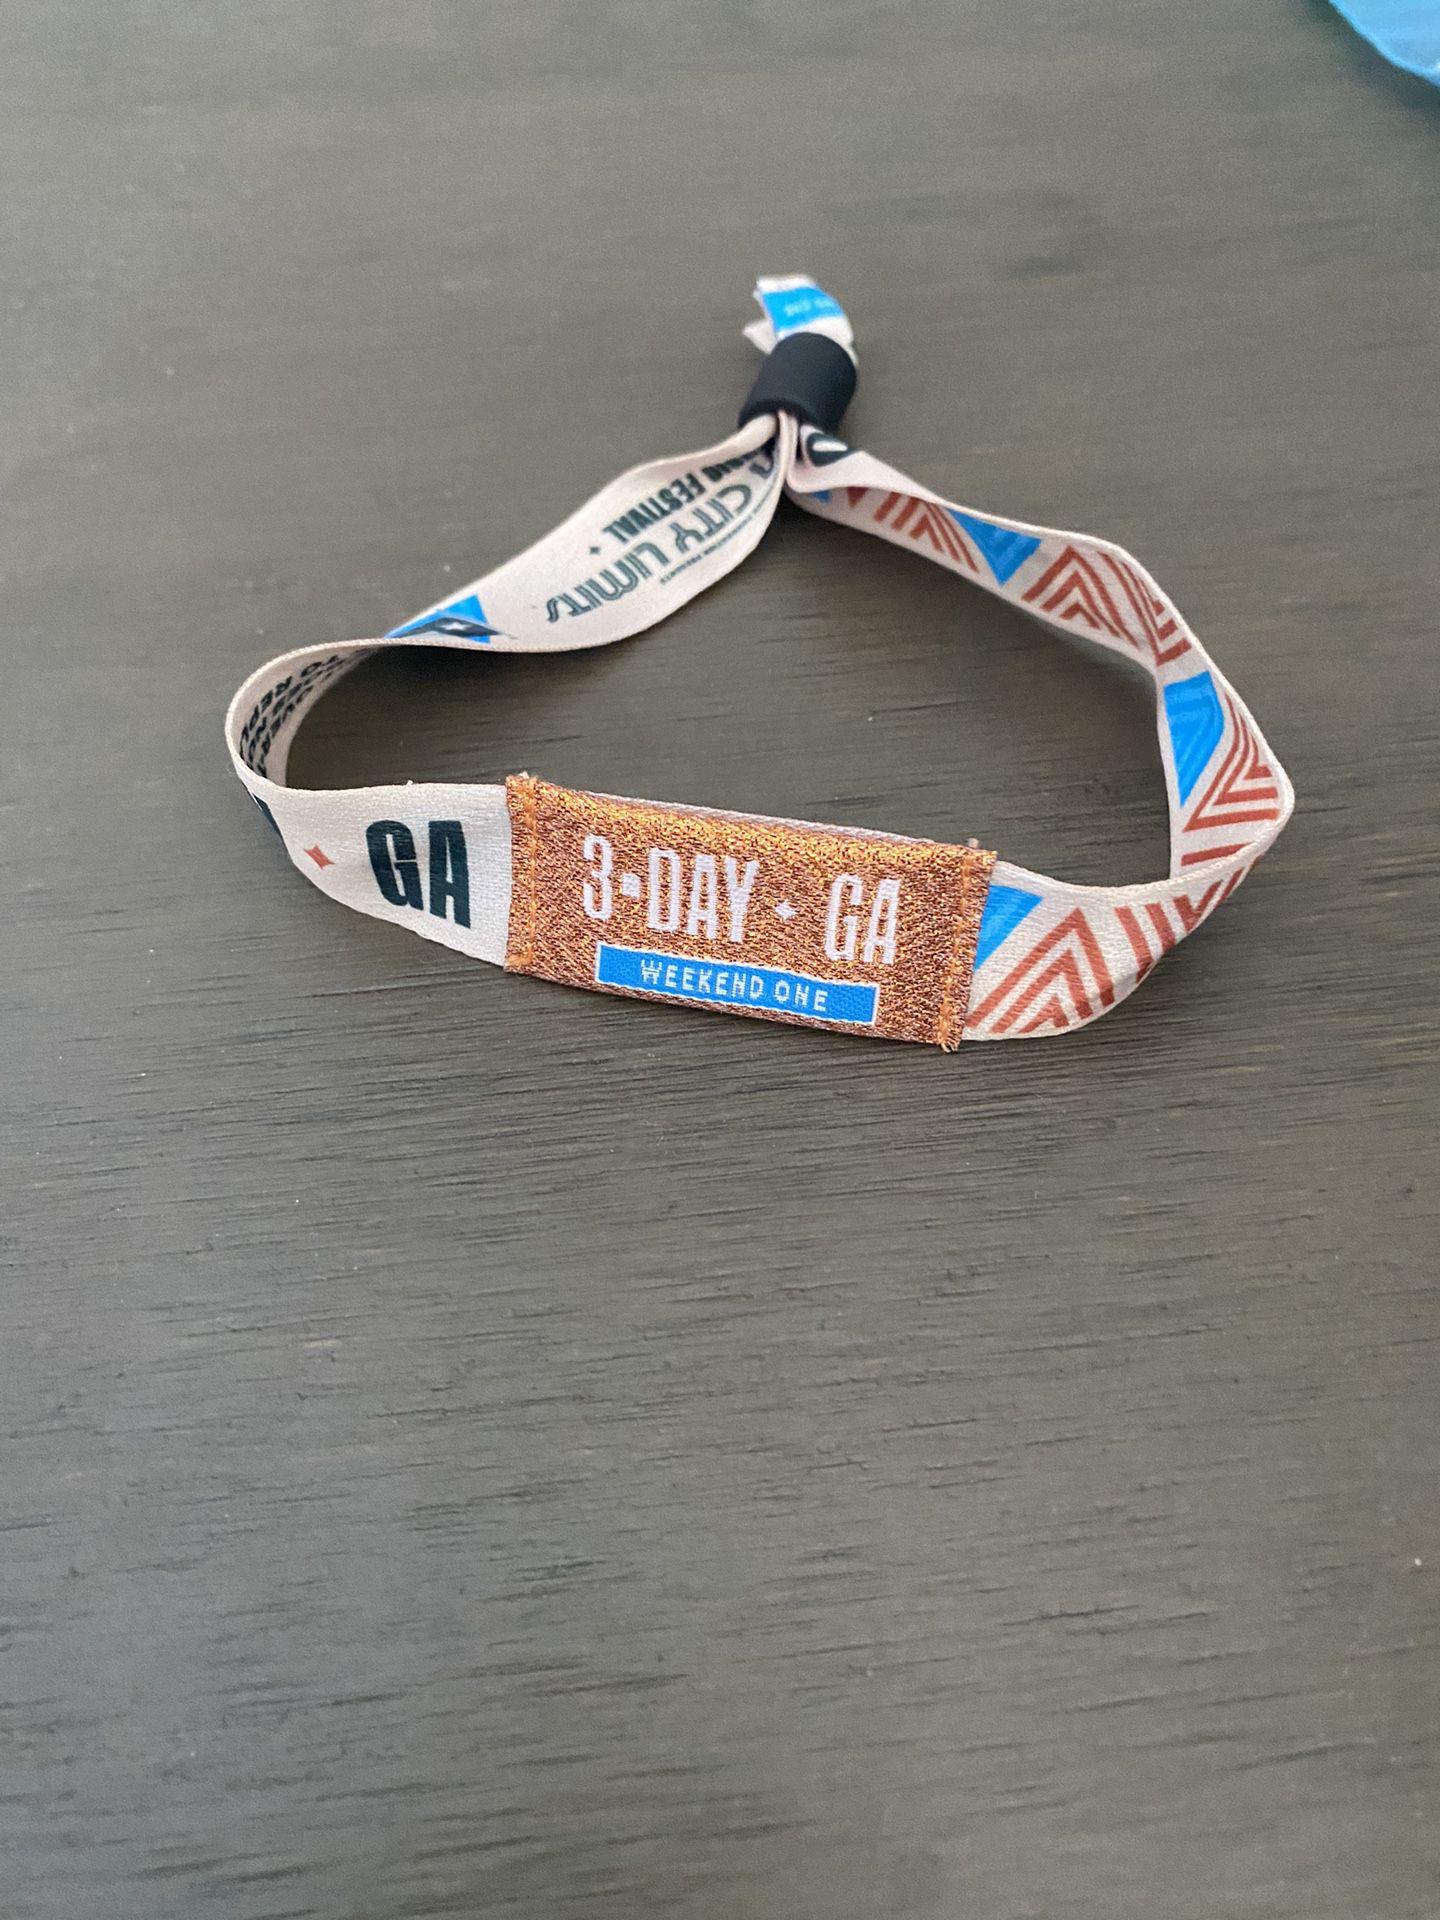 ACL Weekend 1 Wristband